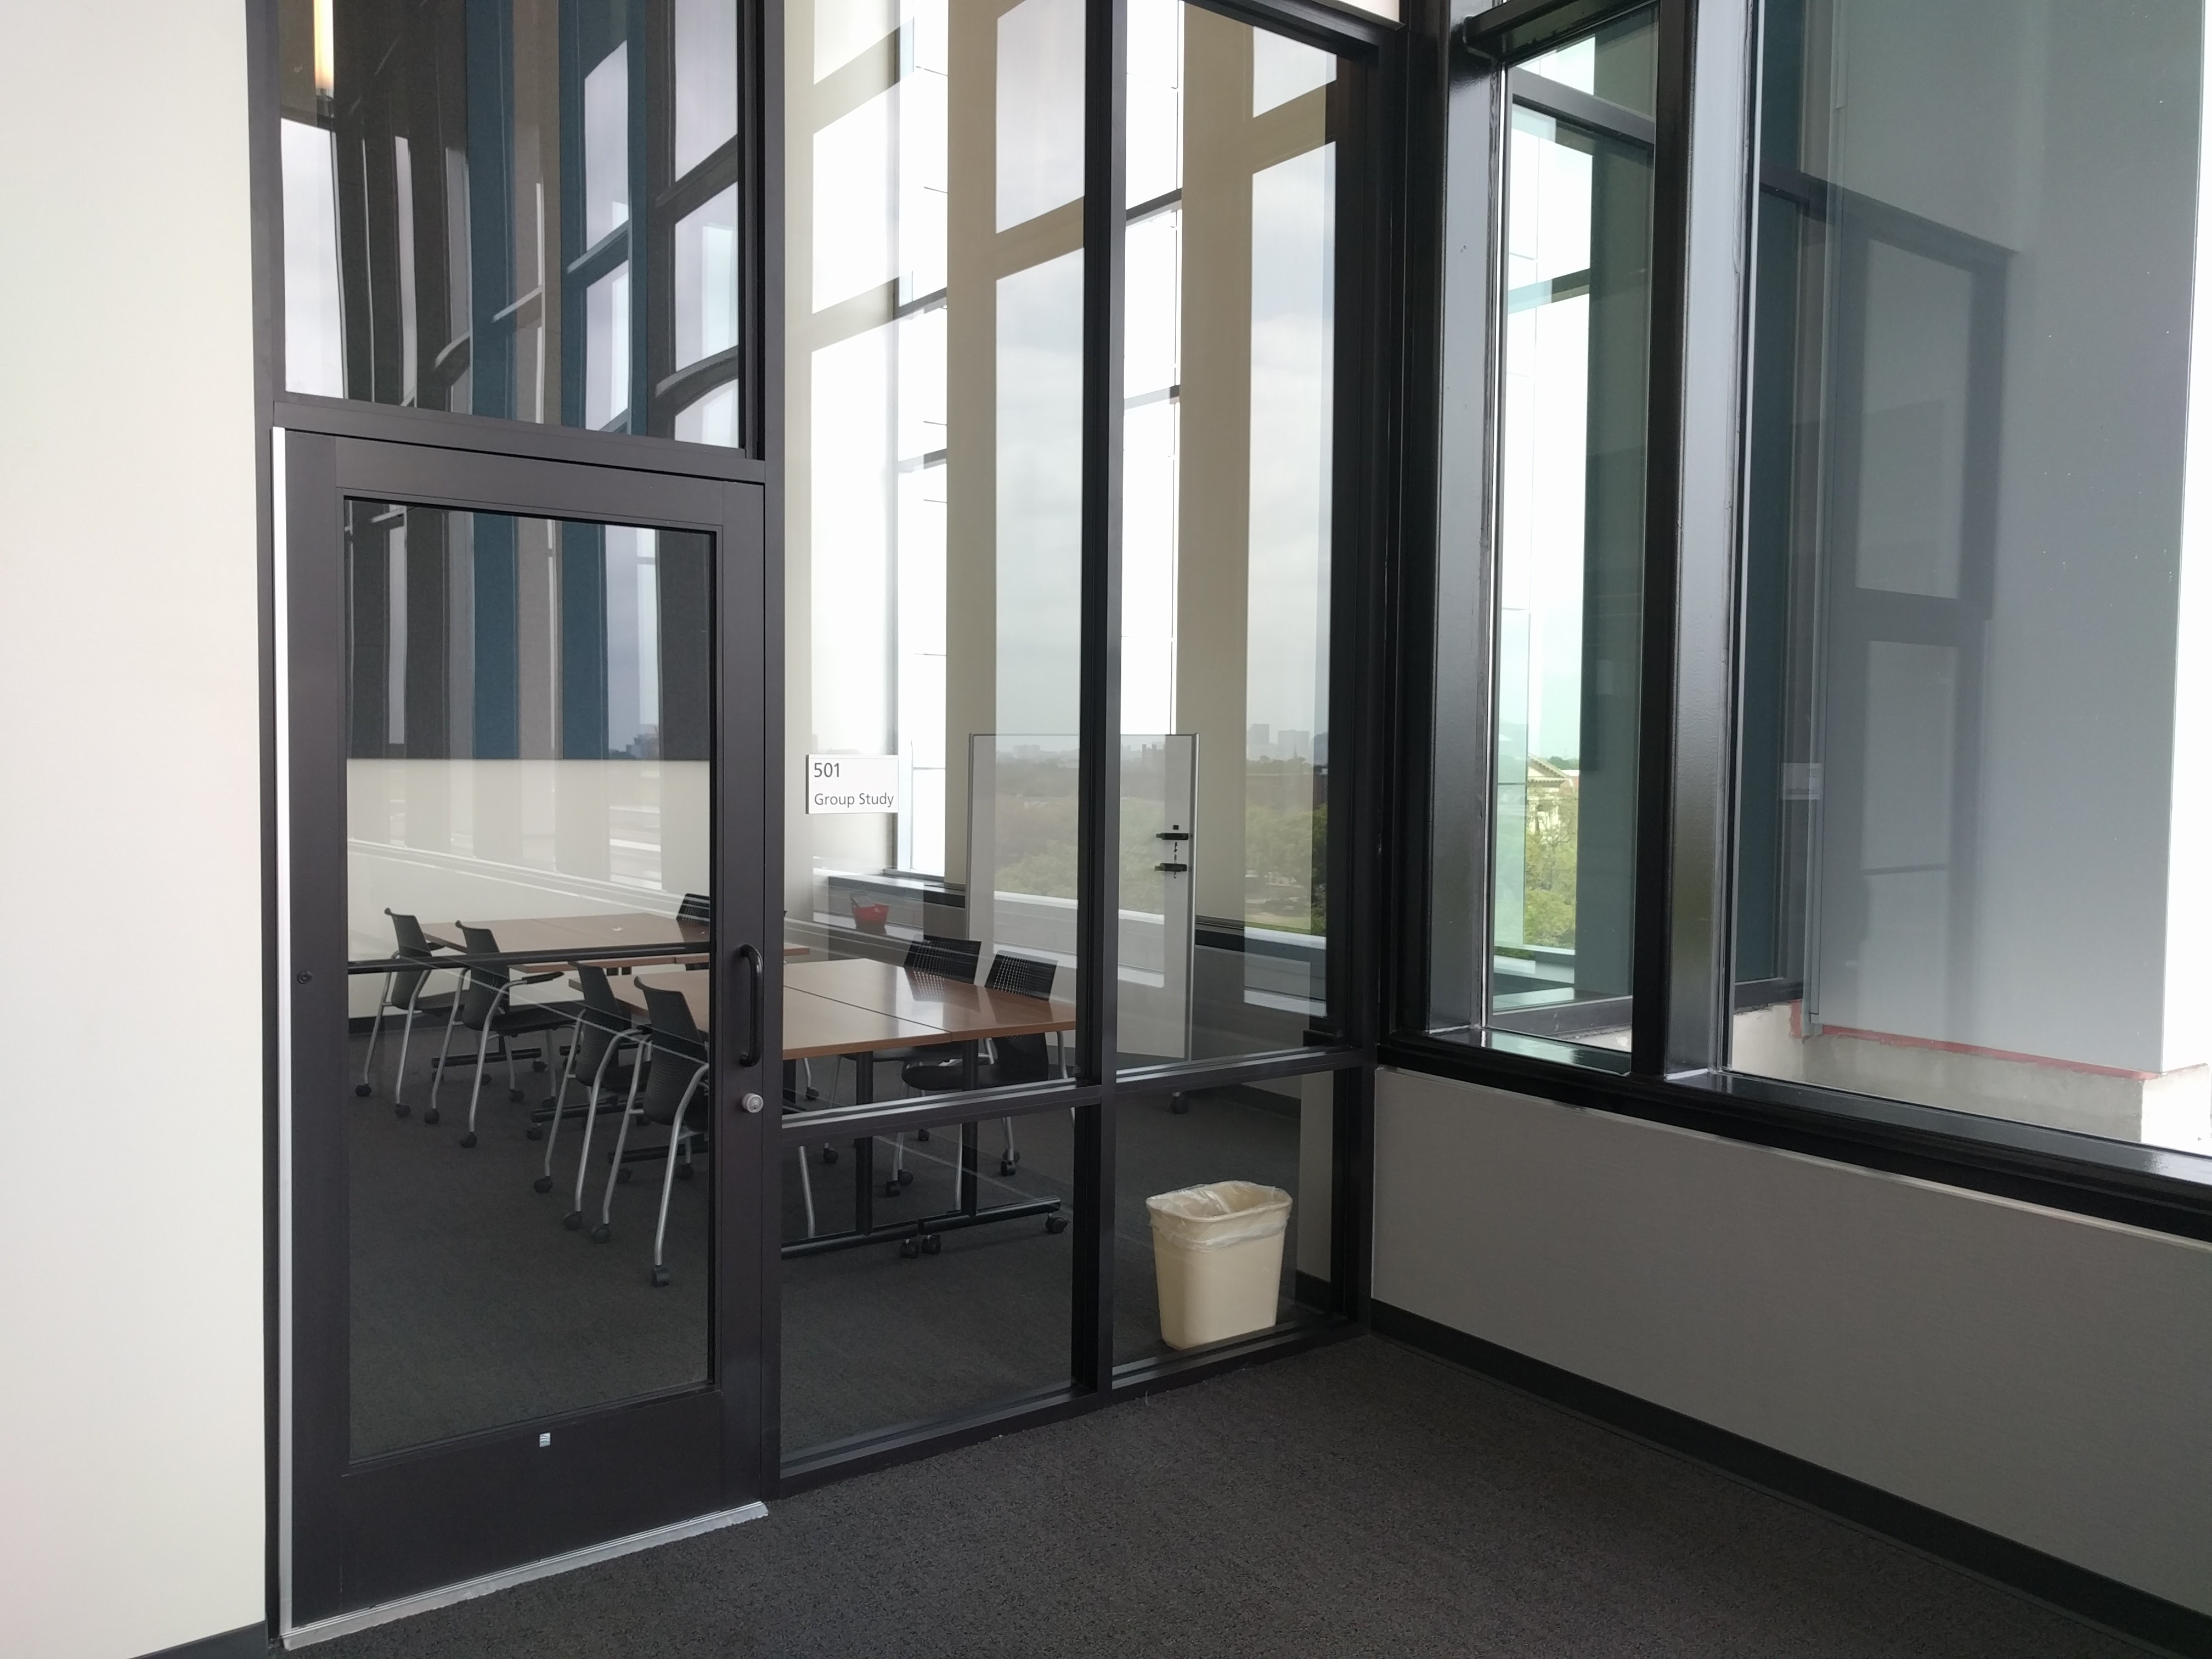 Fifth Floor Group Study Room shown behind its glass wall with tables and chairs for eight people.